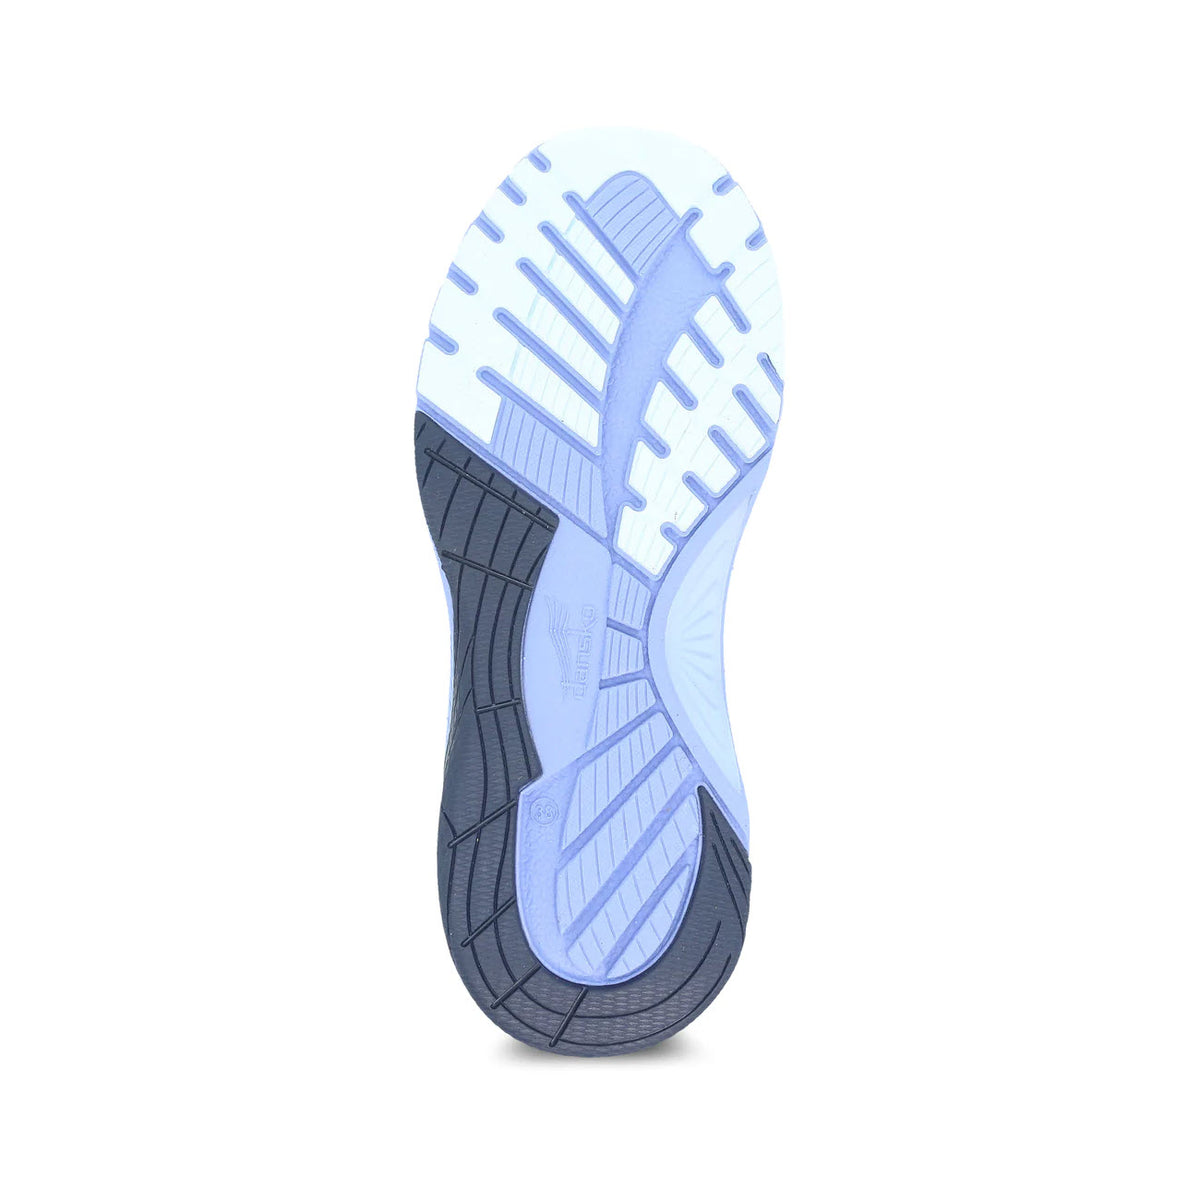 A photo of the sole of a walking sneaker, showing a dual-tone tread design in gray and blue with Dansko Natural Arch Plus technology, isolated on a white background.